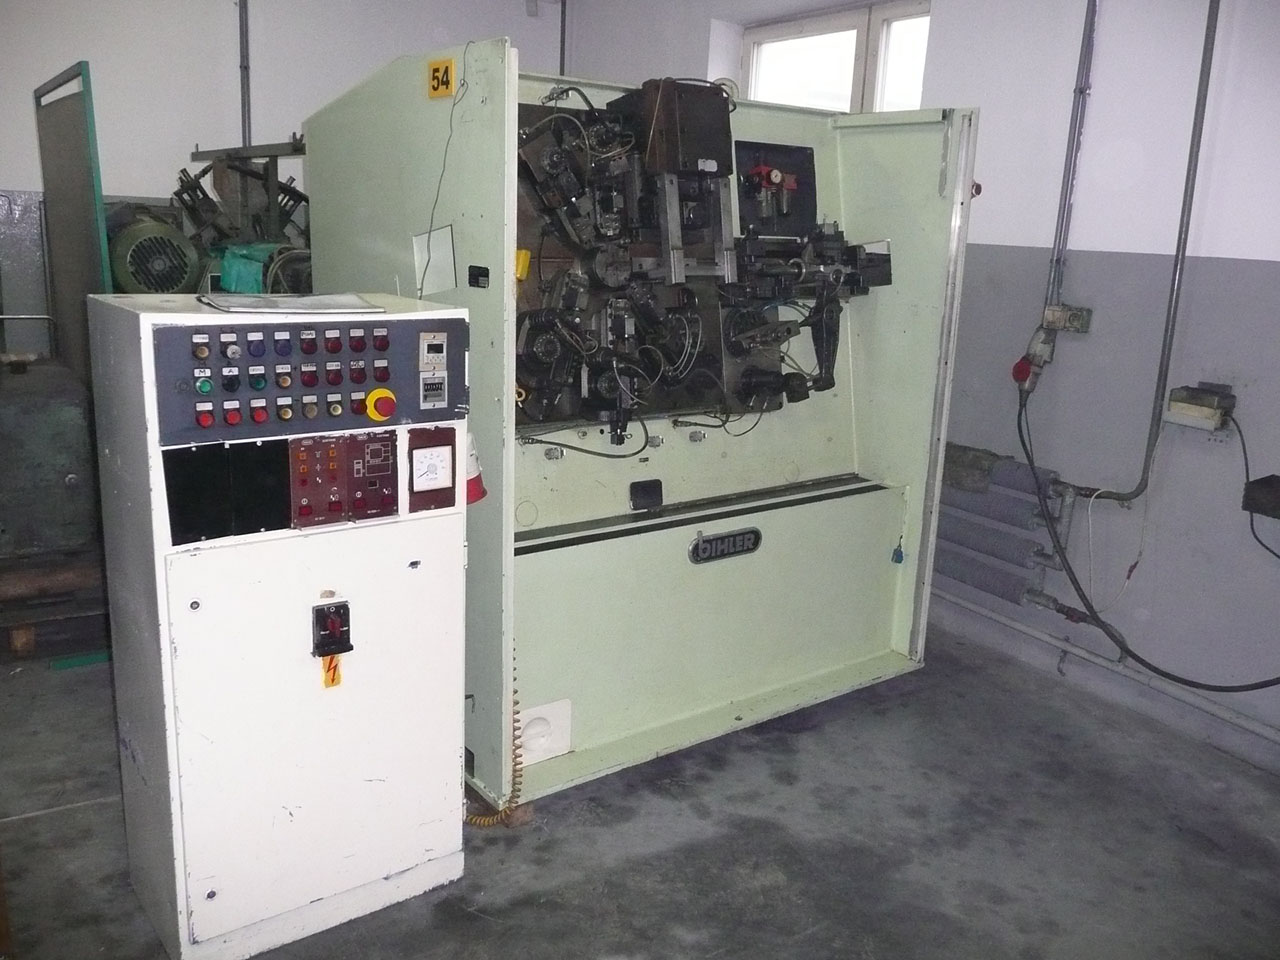 Bihler RM 40 stamping and forming machine PR2476, used